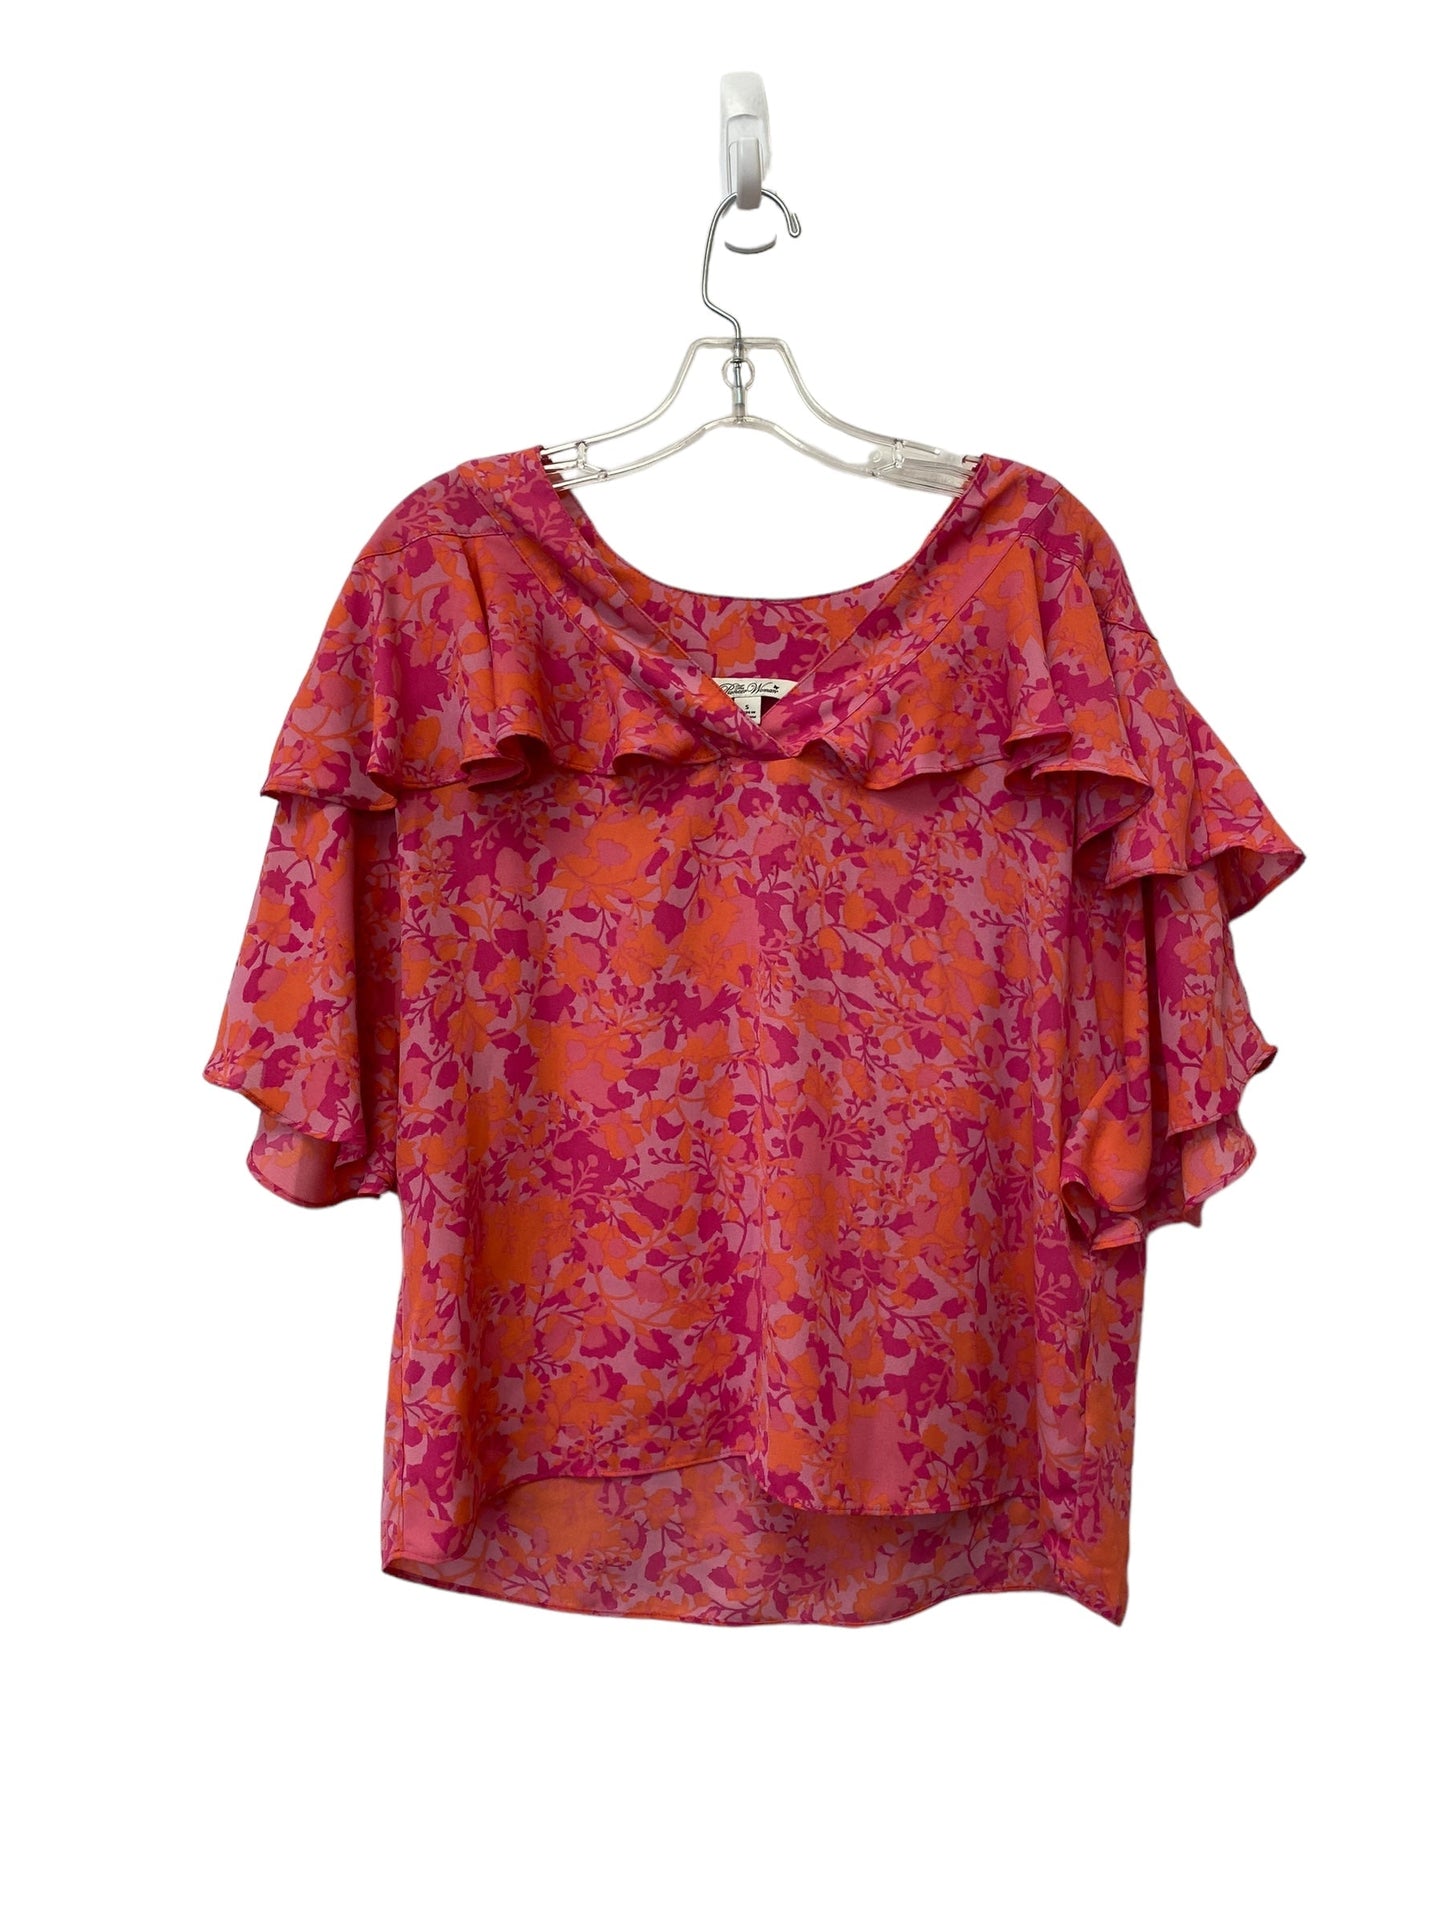 Pink Top Short Sleeve The Pioneer Woman, Size S